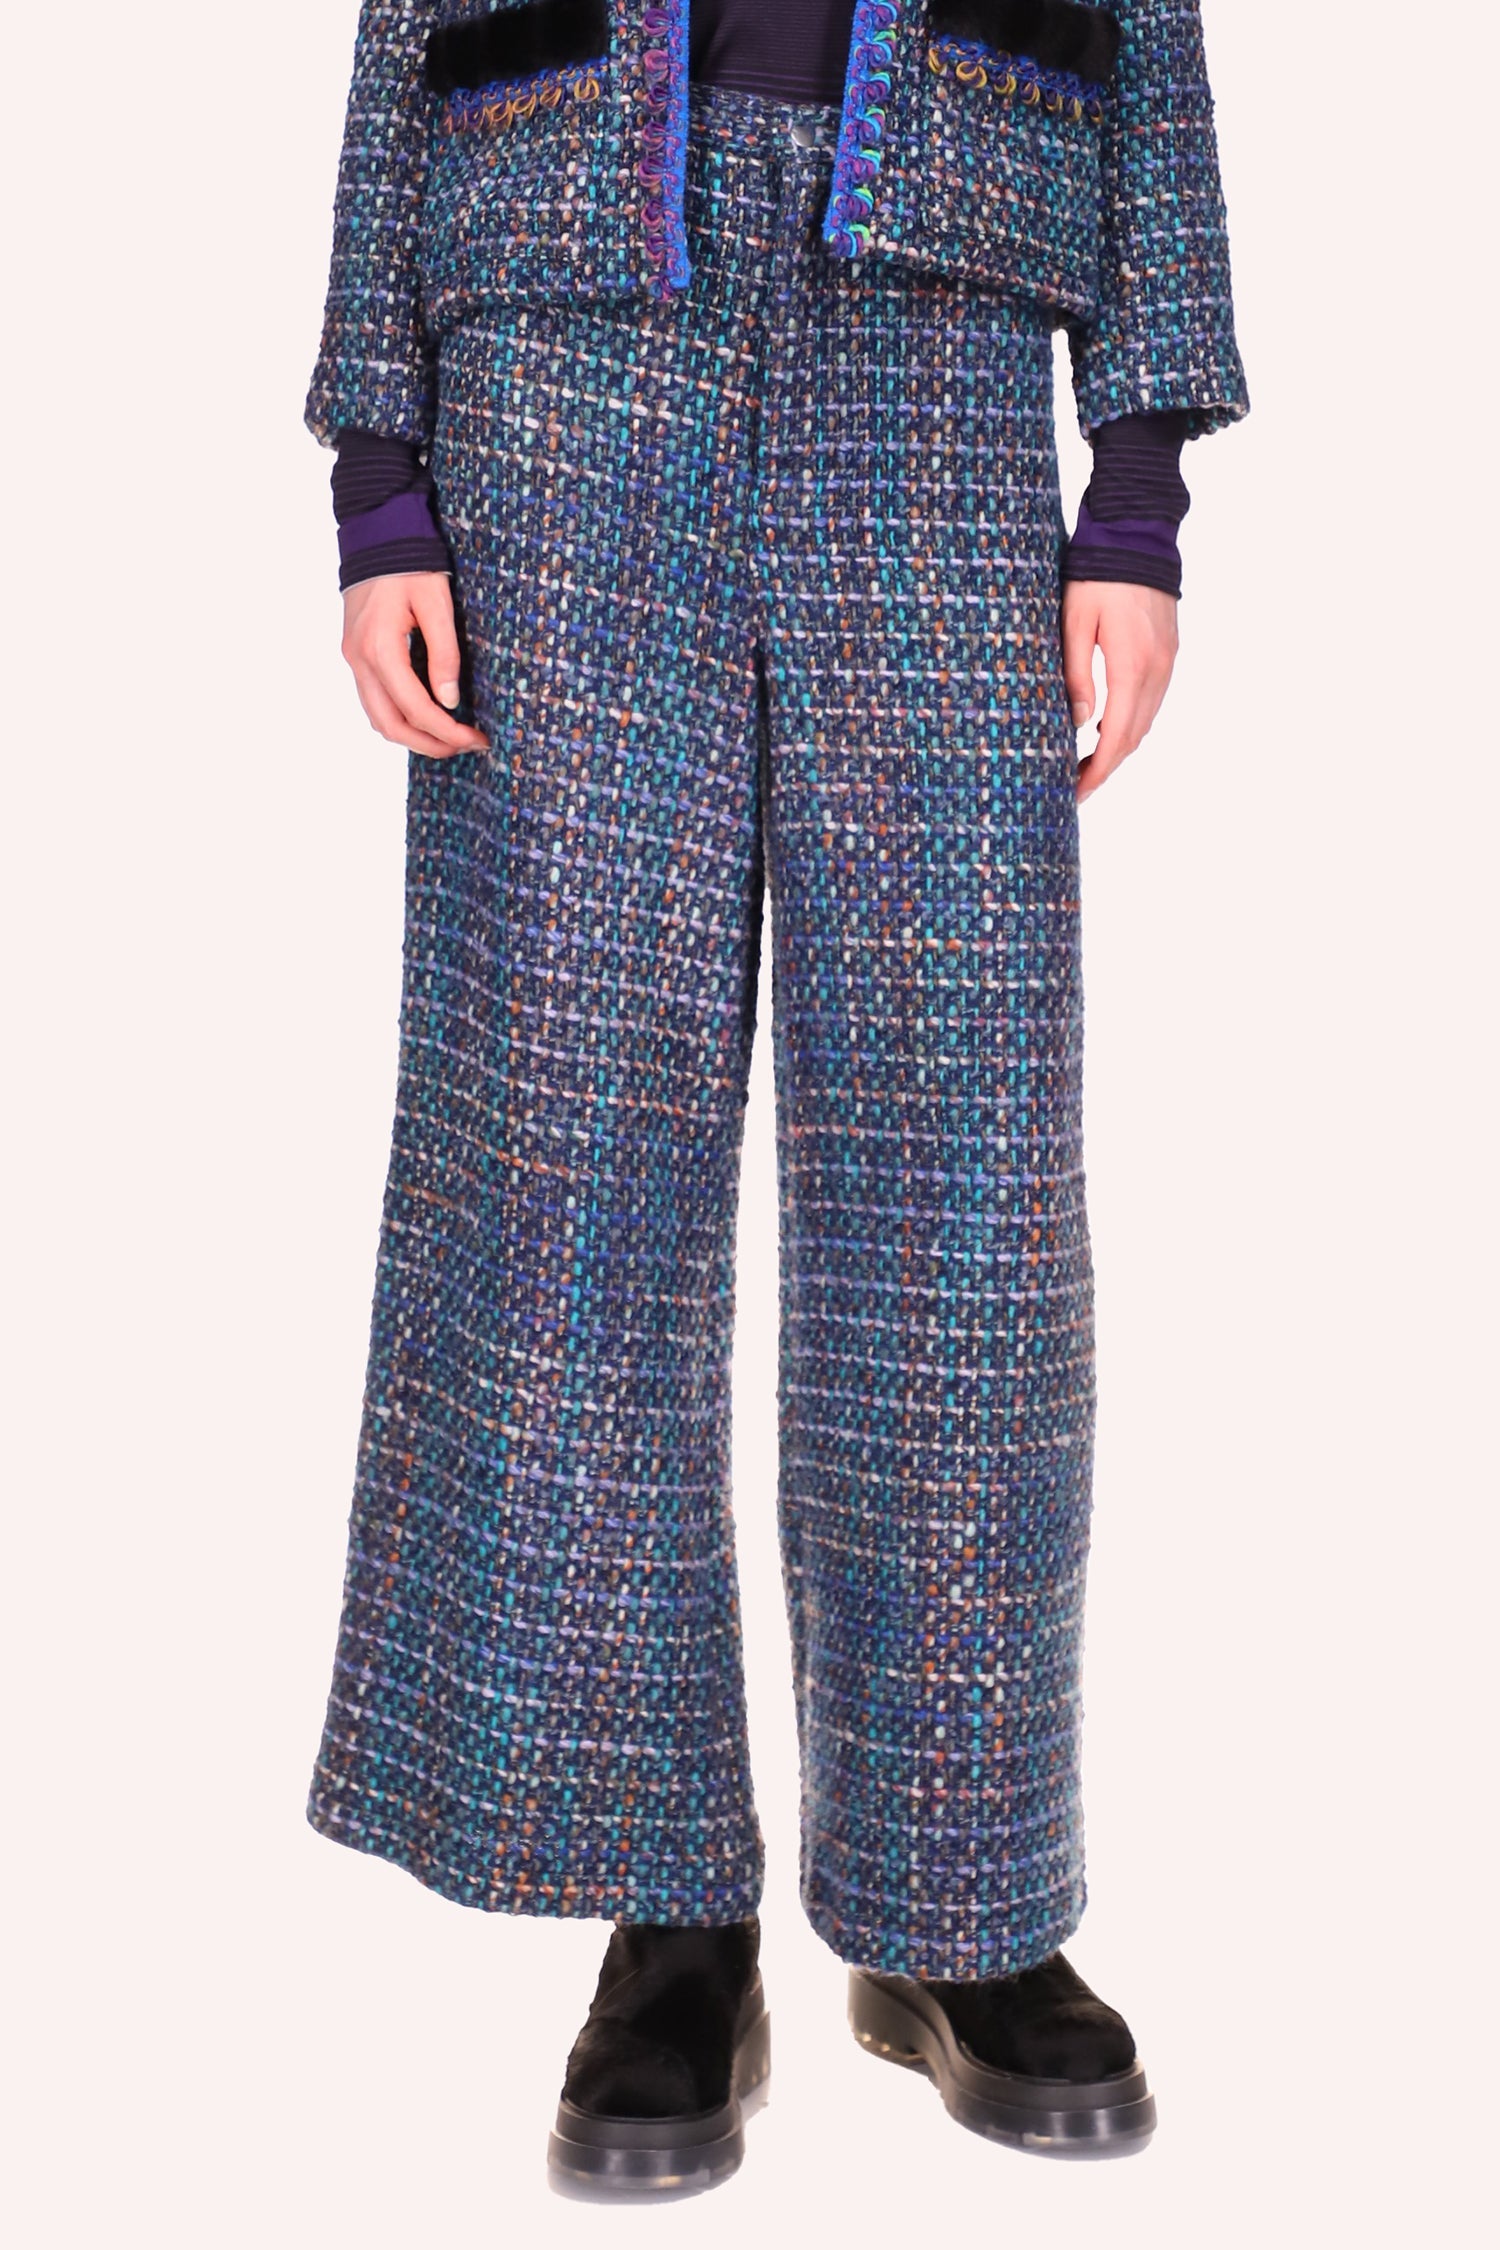 Multi Tweed Pants Turquoise Multi, large pants, ankles long, Button to close, and zipper.